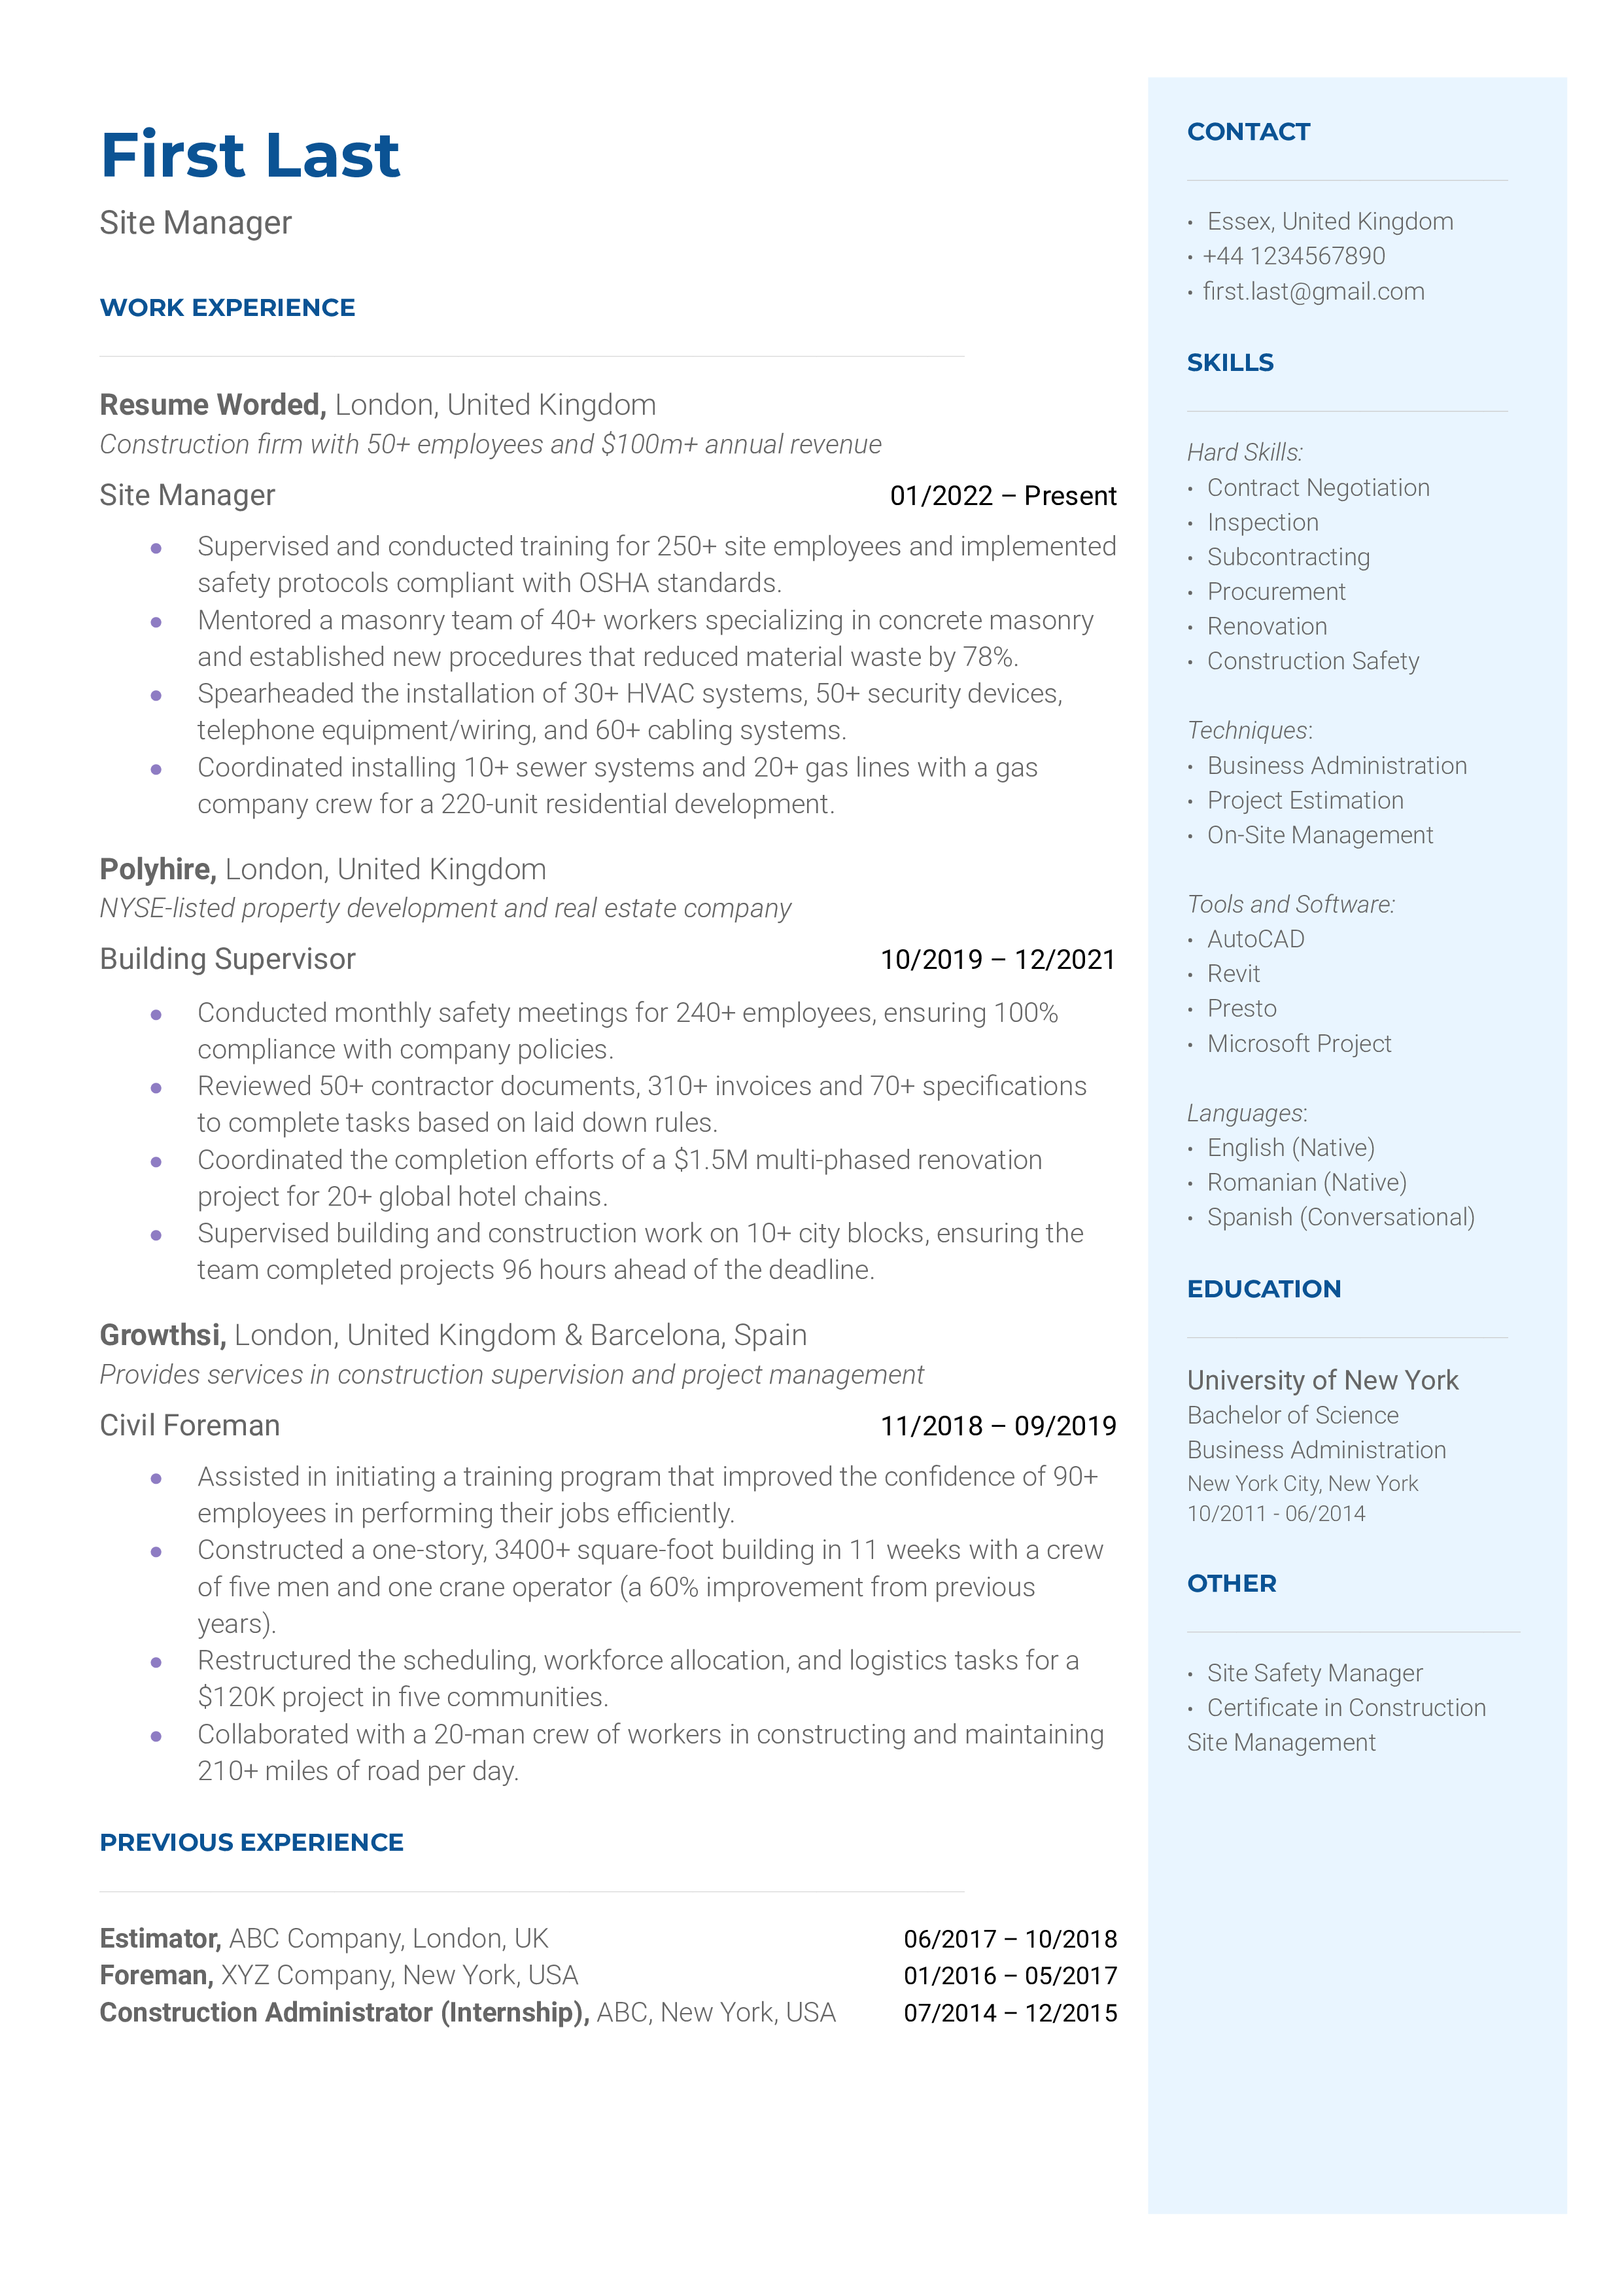 Site Manager Resume Sample